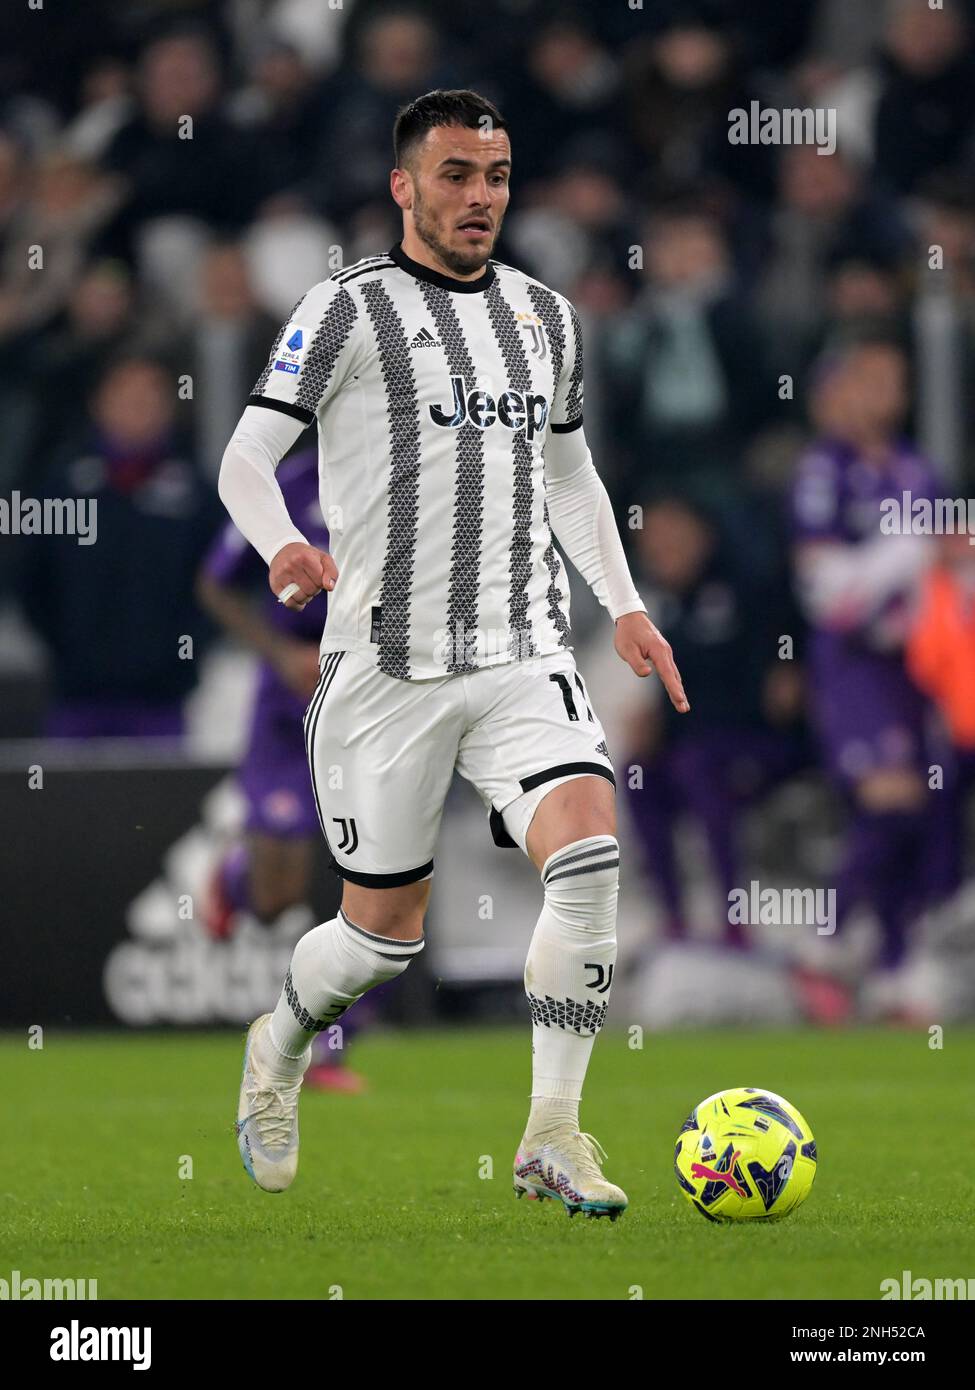 TURIN - Filip Kostic of Juventus FC during the Italian Serie A match between Juventus FC and ACF Fiorentina at Allianz Stadium on February 12, 2023 in Turin, Italy. AP | Dutch Height | GERRIT OF COLOGNE Stock Photo